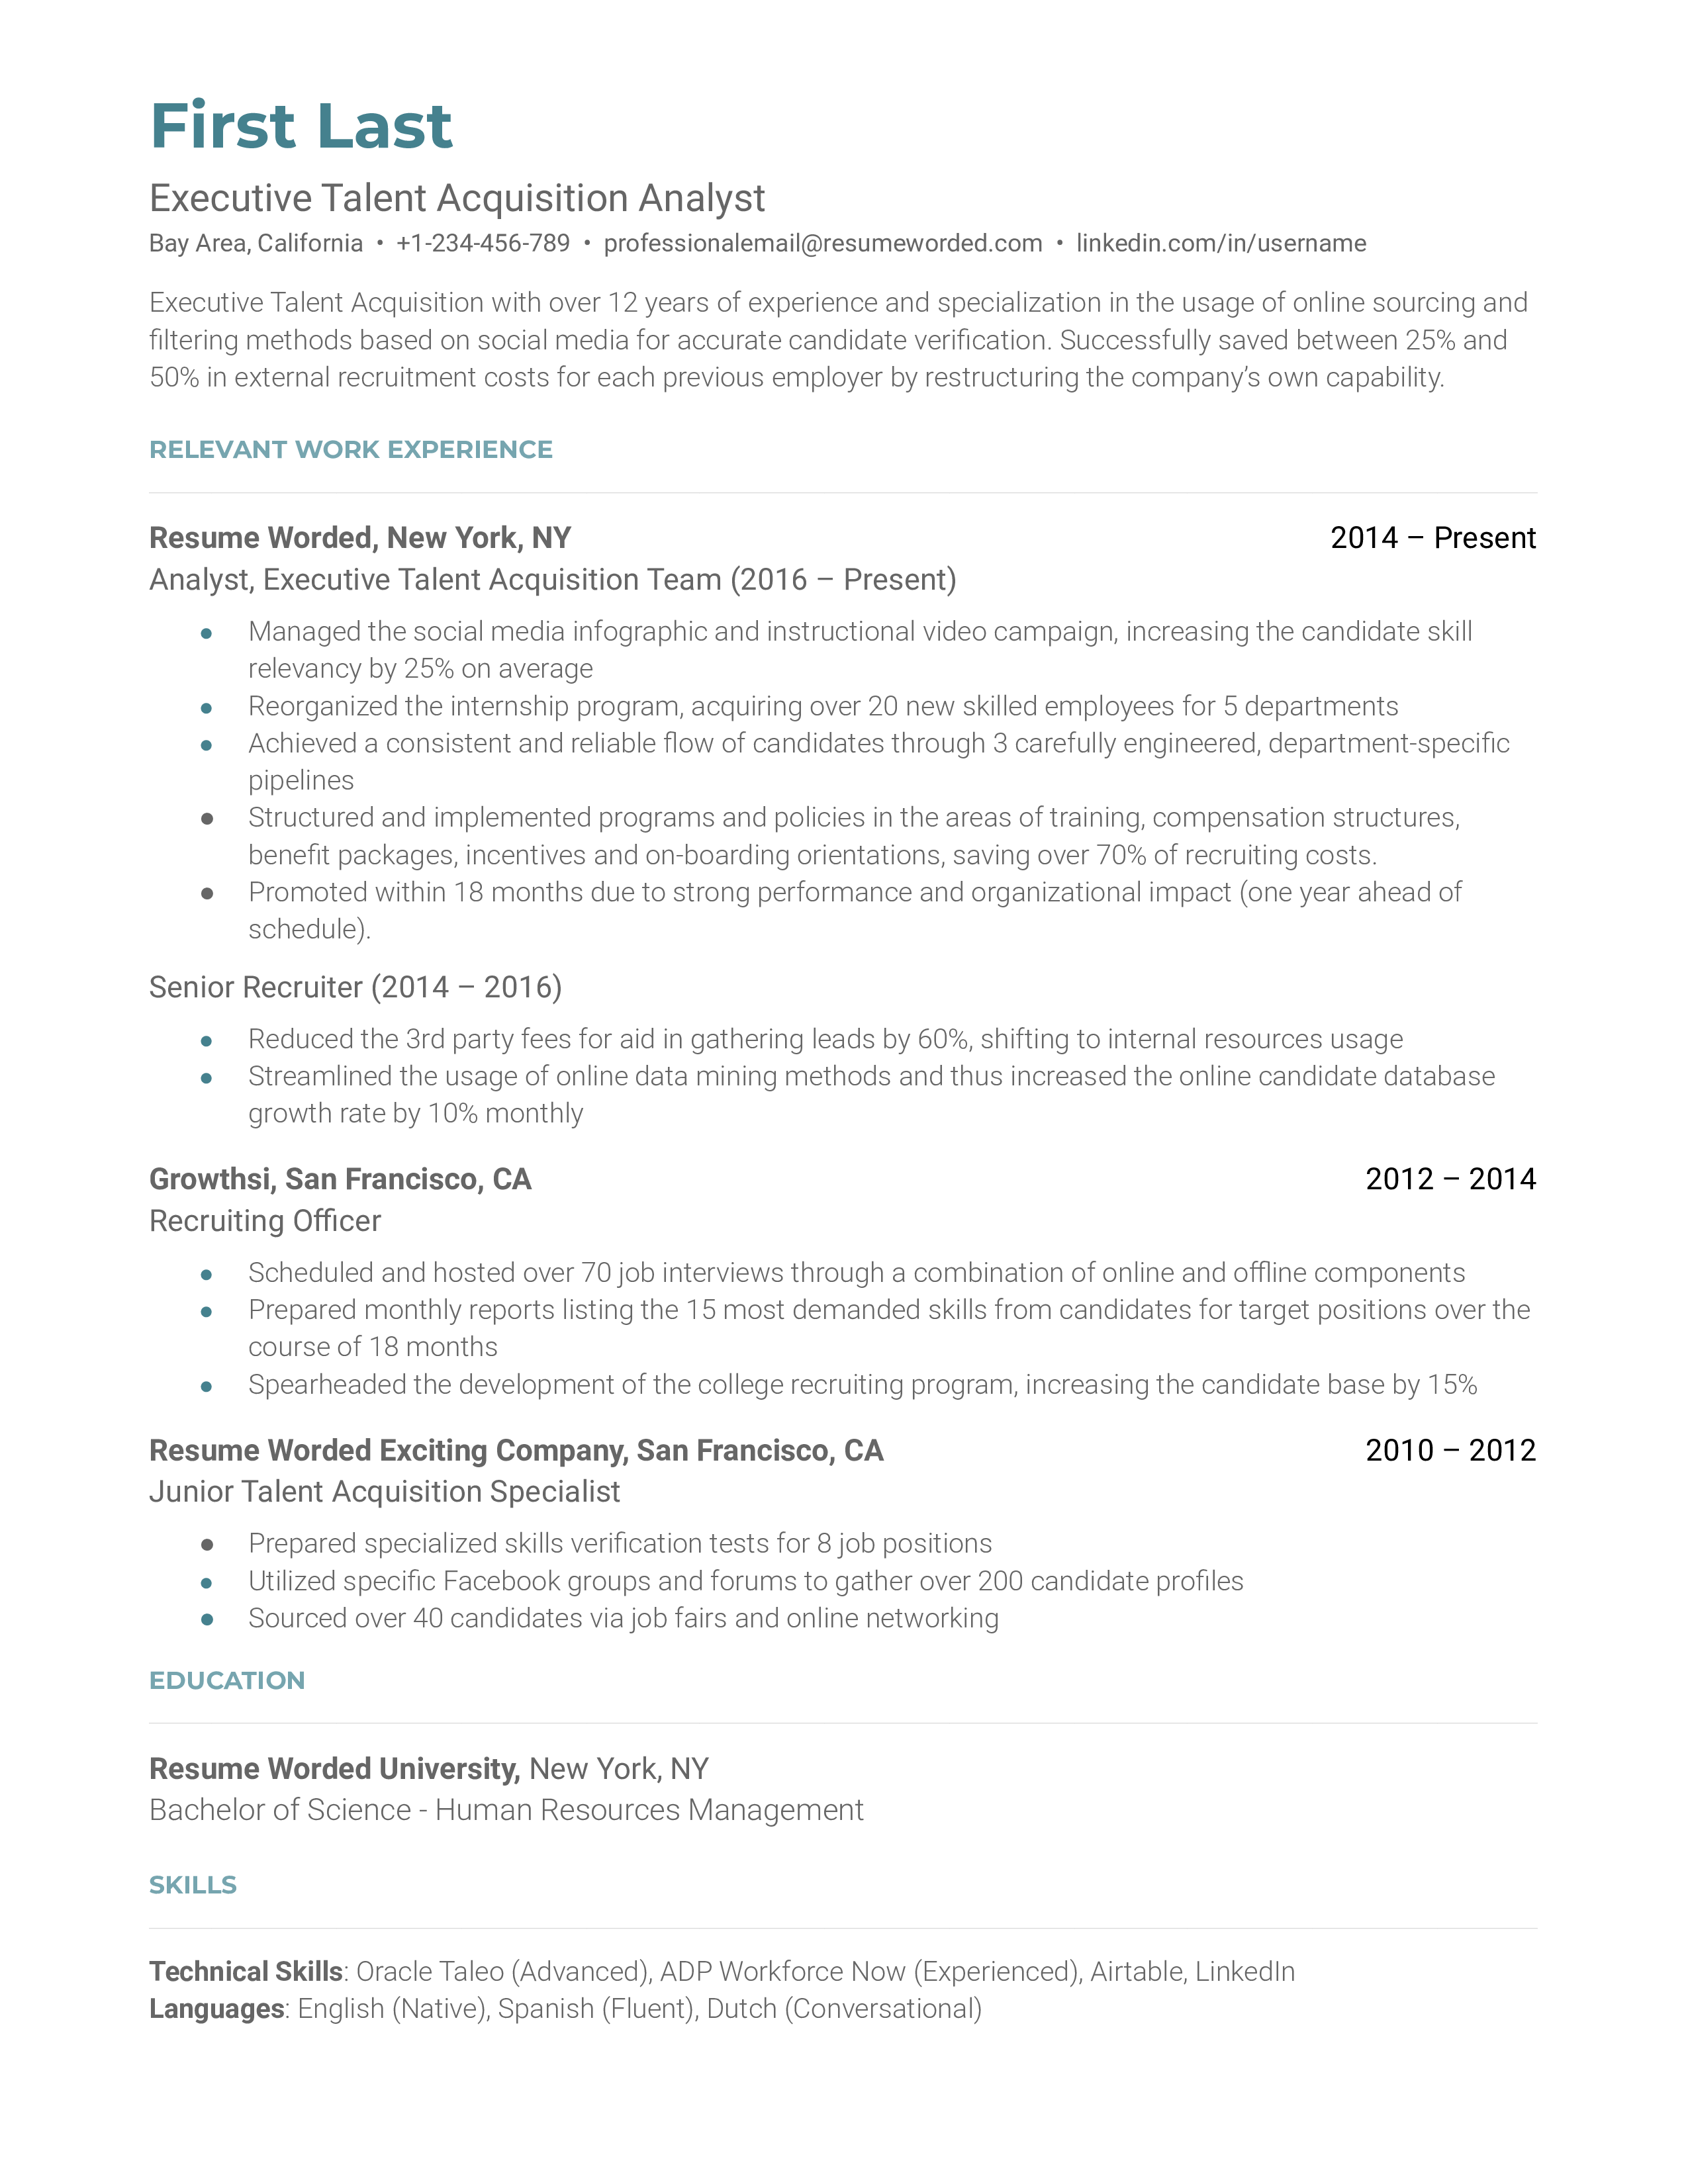 Executive talent acquisition analyst resume sample that highlights previous admin experience and quantifiable efficiency.